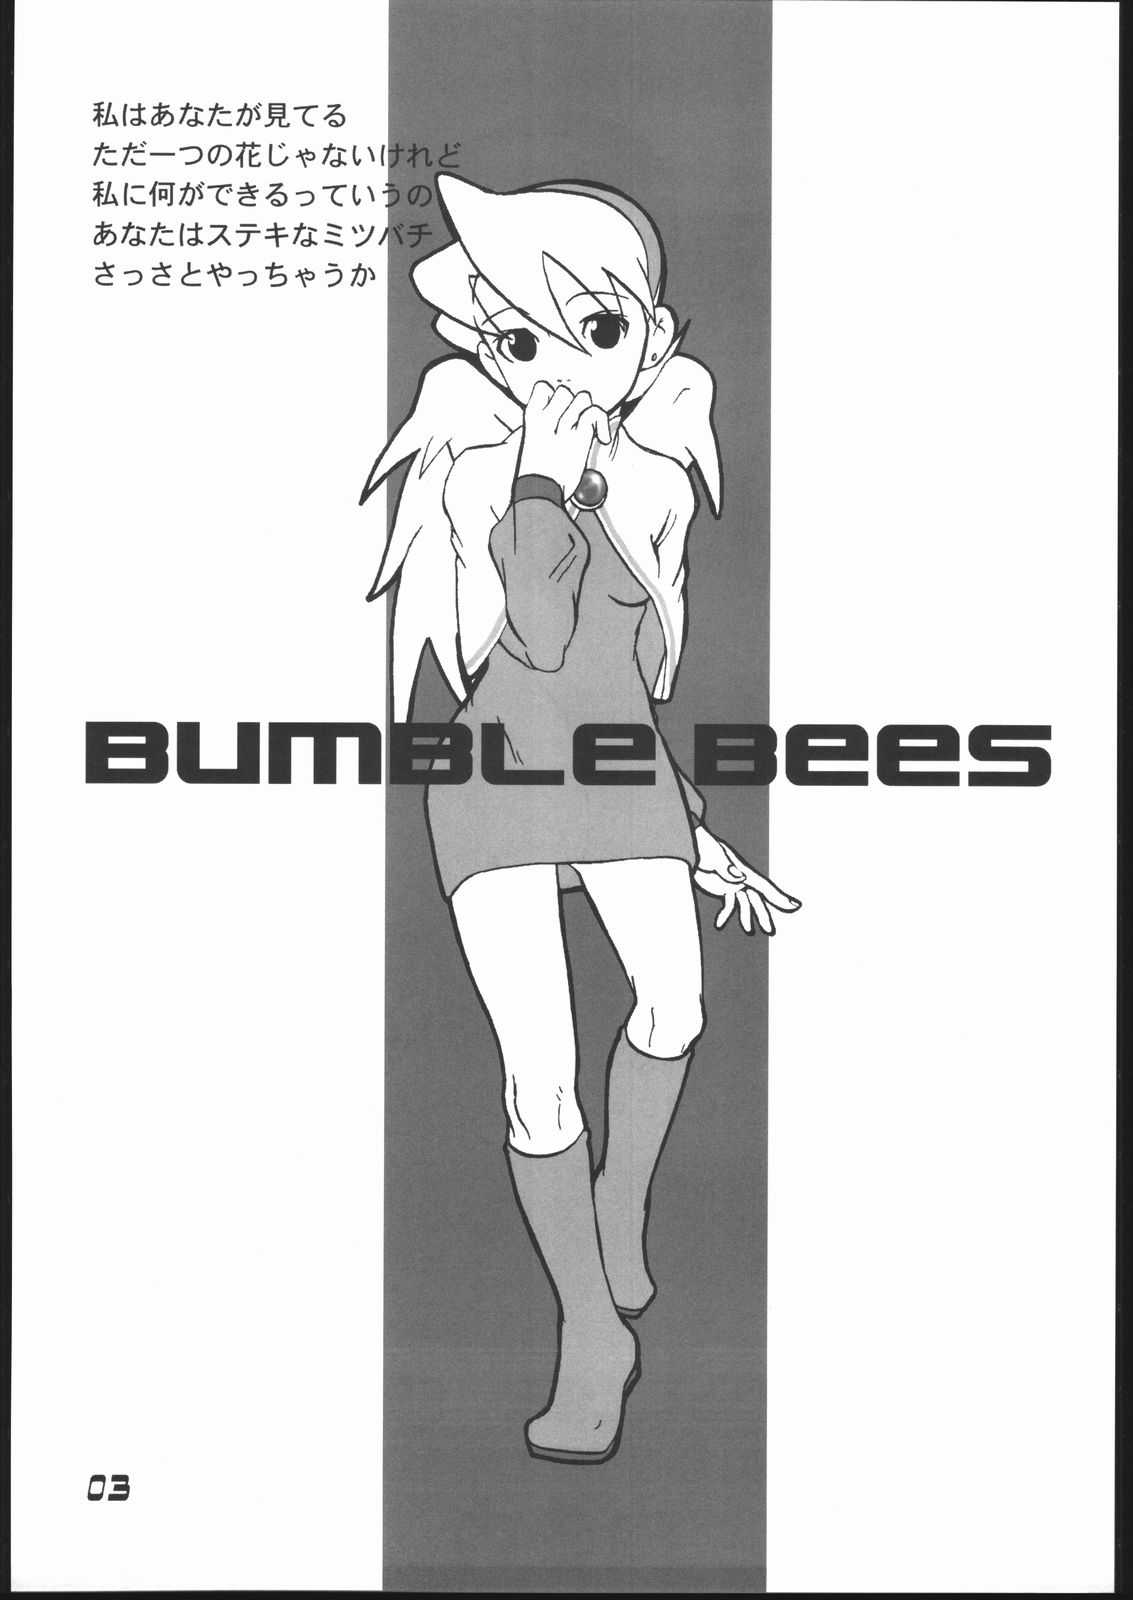 [Buffalo Head Butts] BUMBLE BEES (Breath of Fire IV) [Buffalo Head Butts] BUMBLE BEES (ブレス オブ ファイアIV)